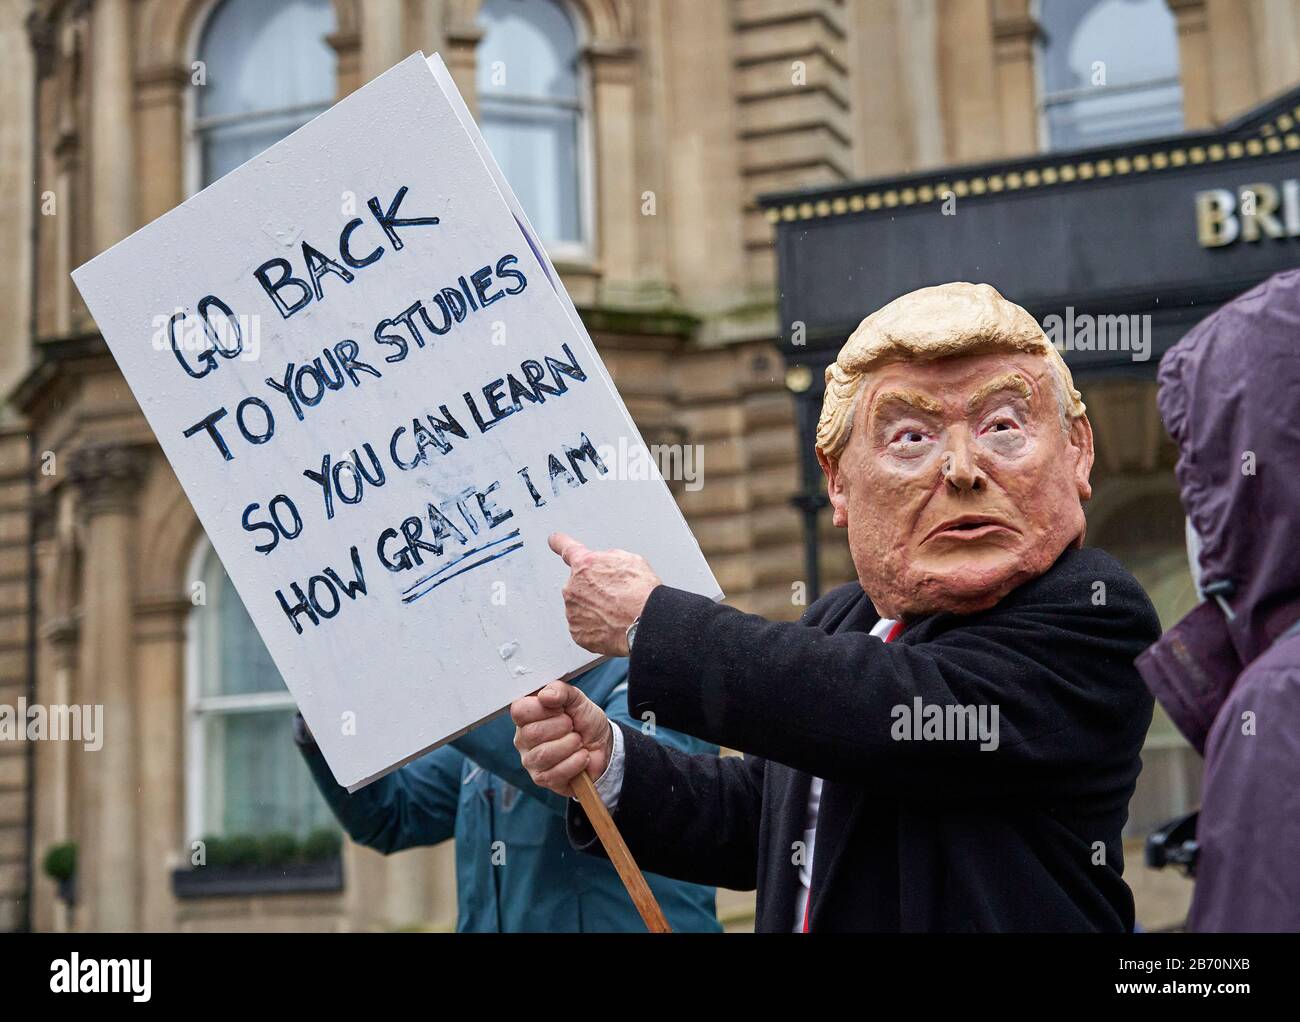 Man in a Donald Trump mask admonishing children for being on school strike on the Greta Thunberg March for Climate in Bristol UK Stock Photo